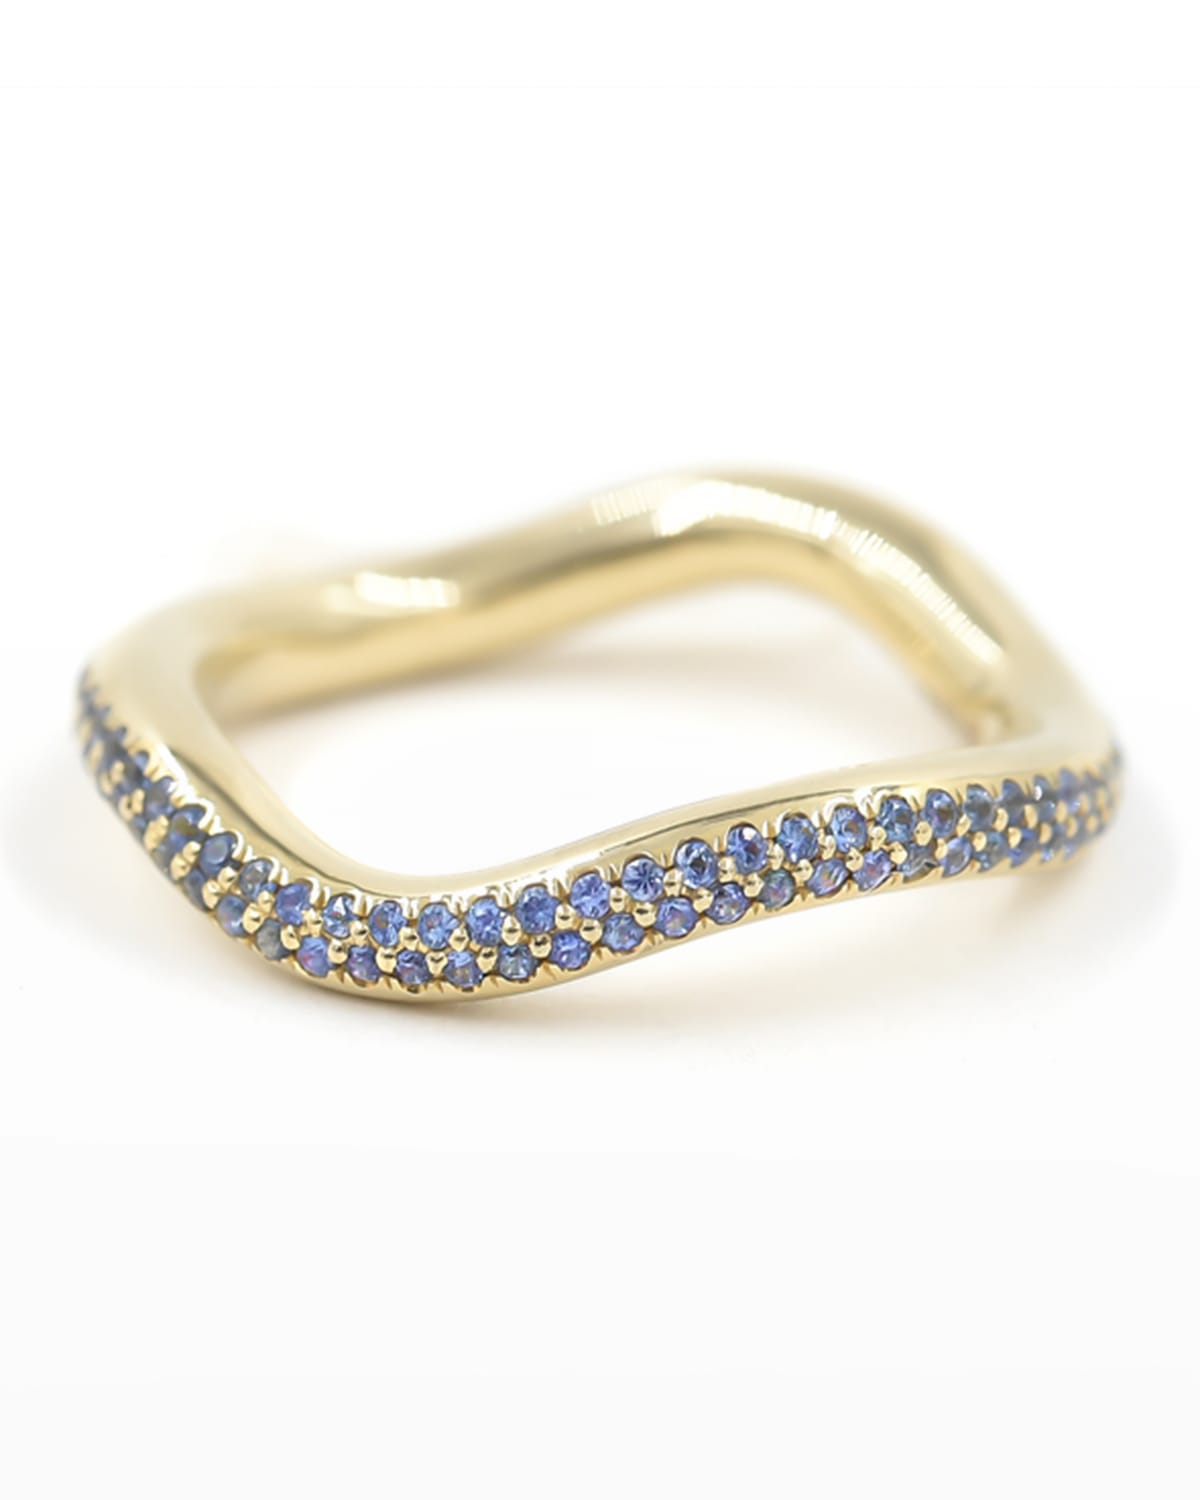 BONDEYE JEWELRY Popie Wave Ring with Pave Blue Sapphires, Size 7